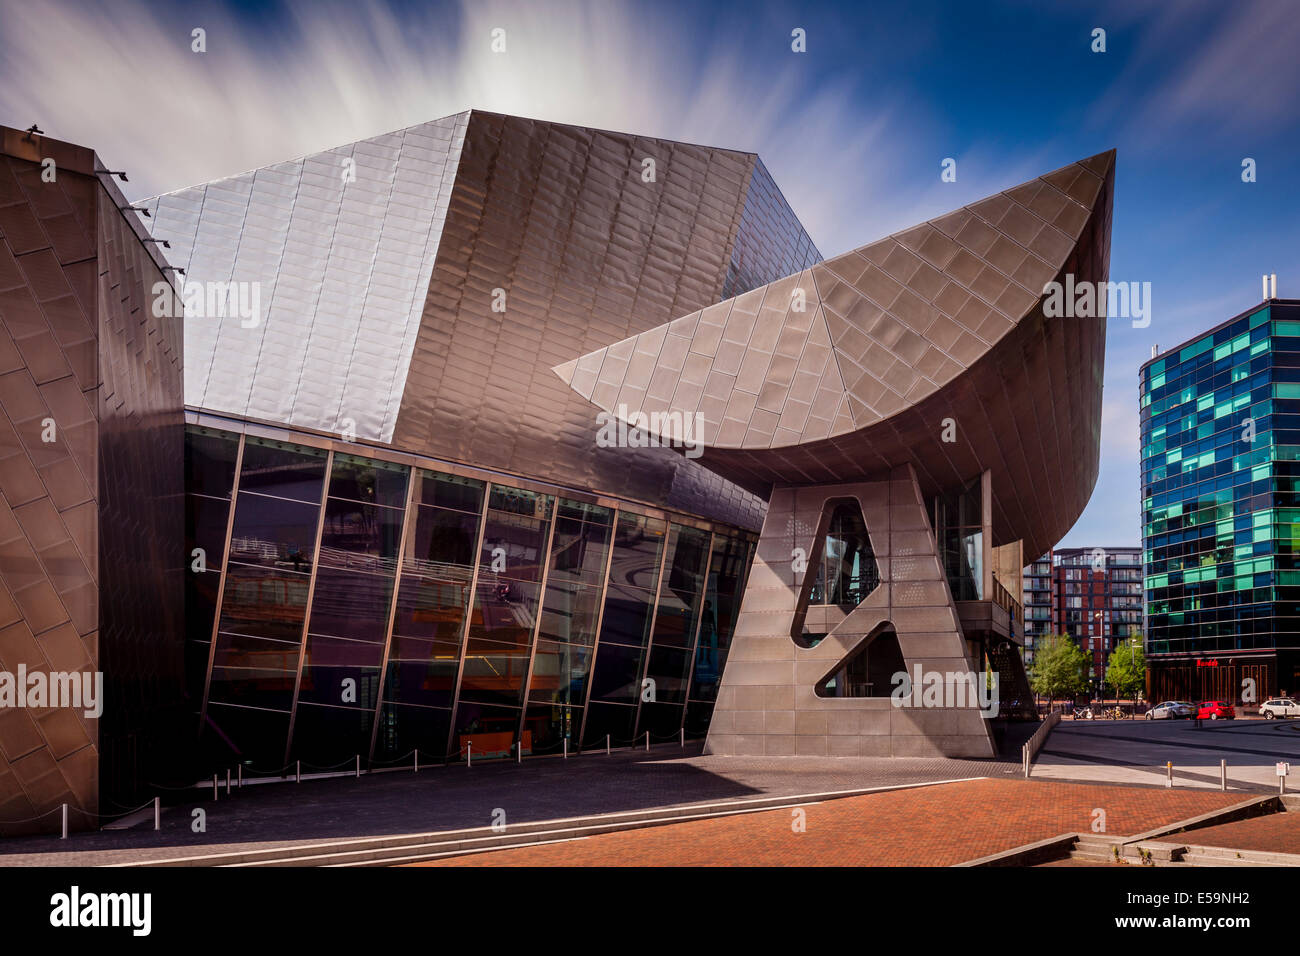 The Lowry, Salford Quays, Manchester, England Stock Photo